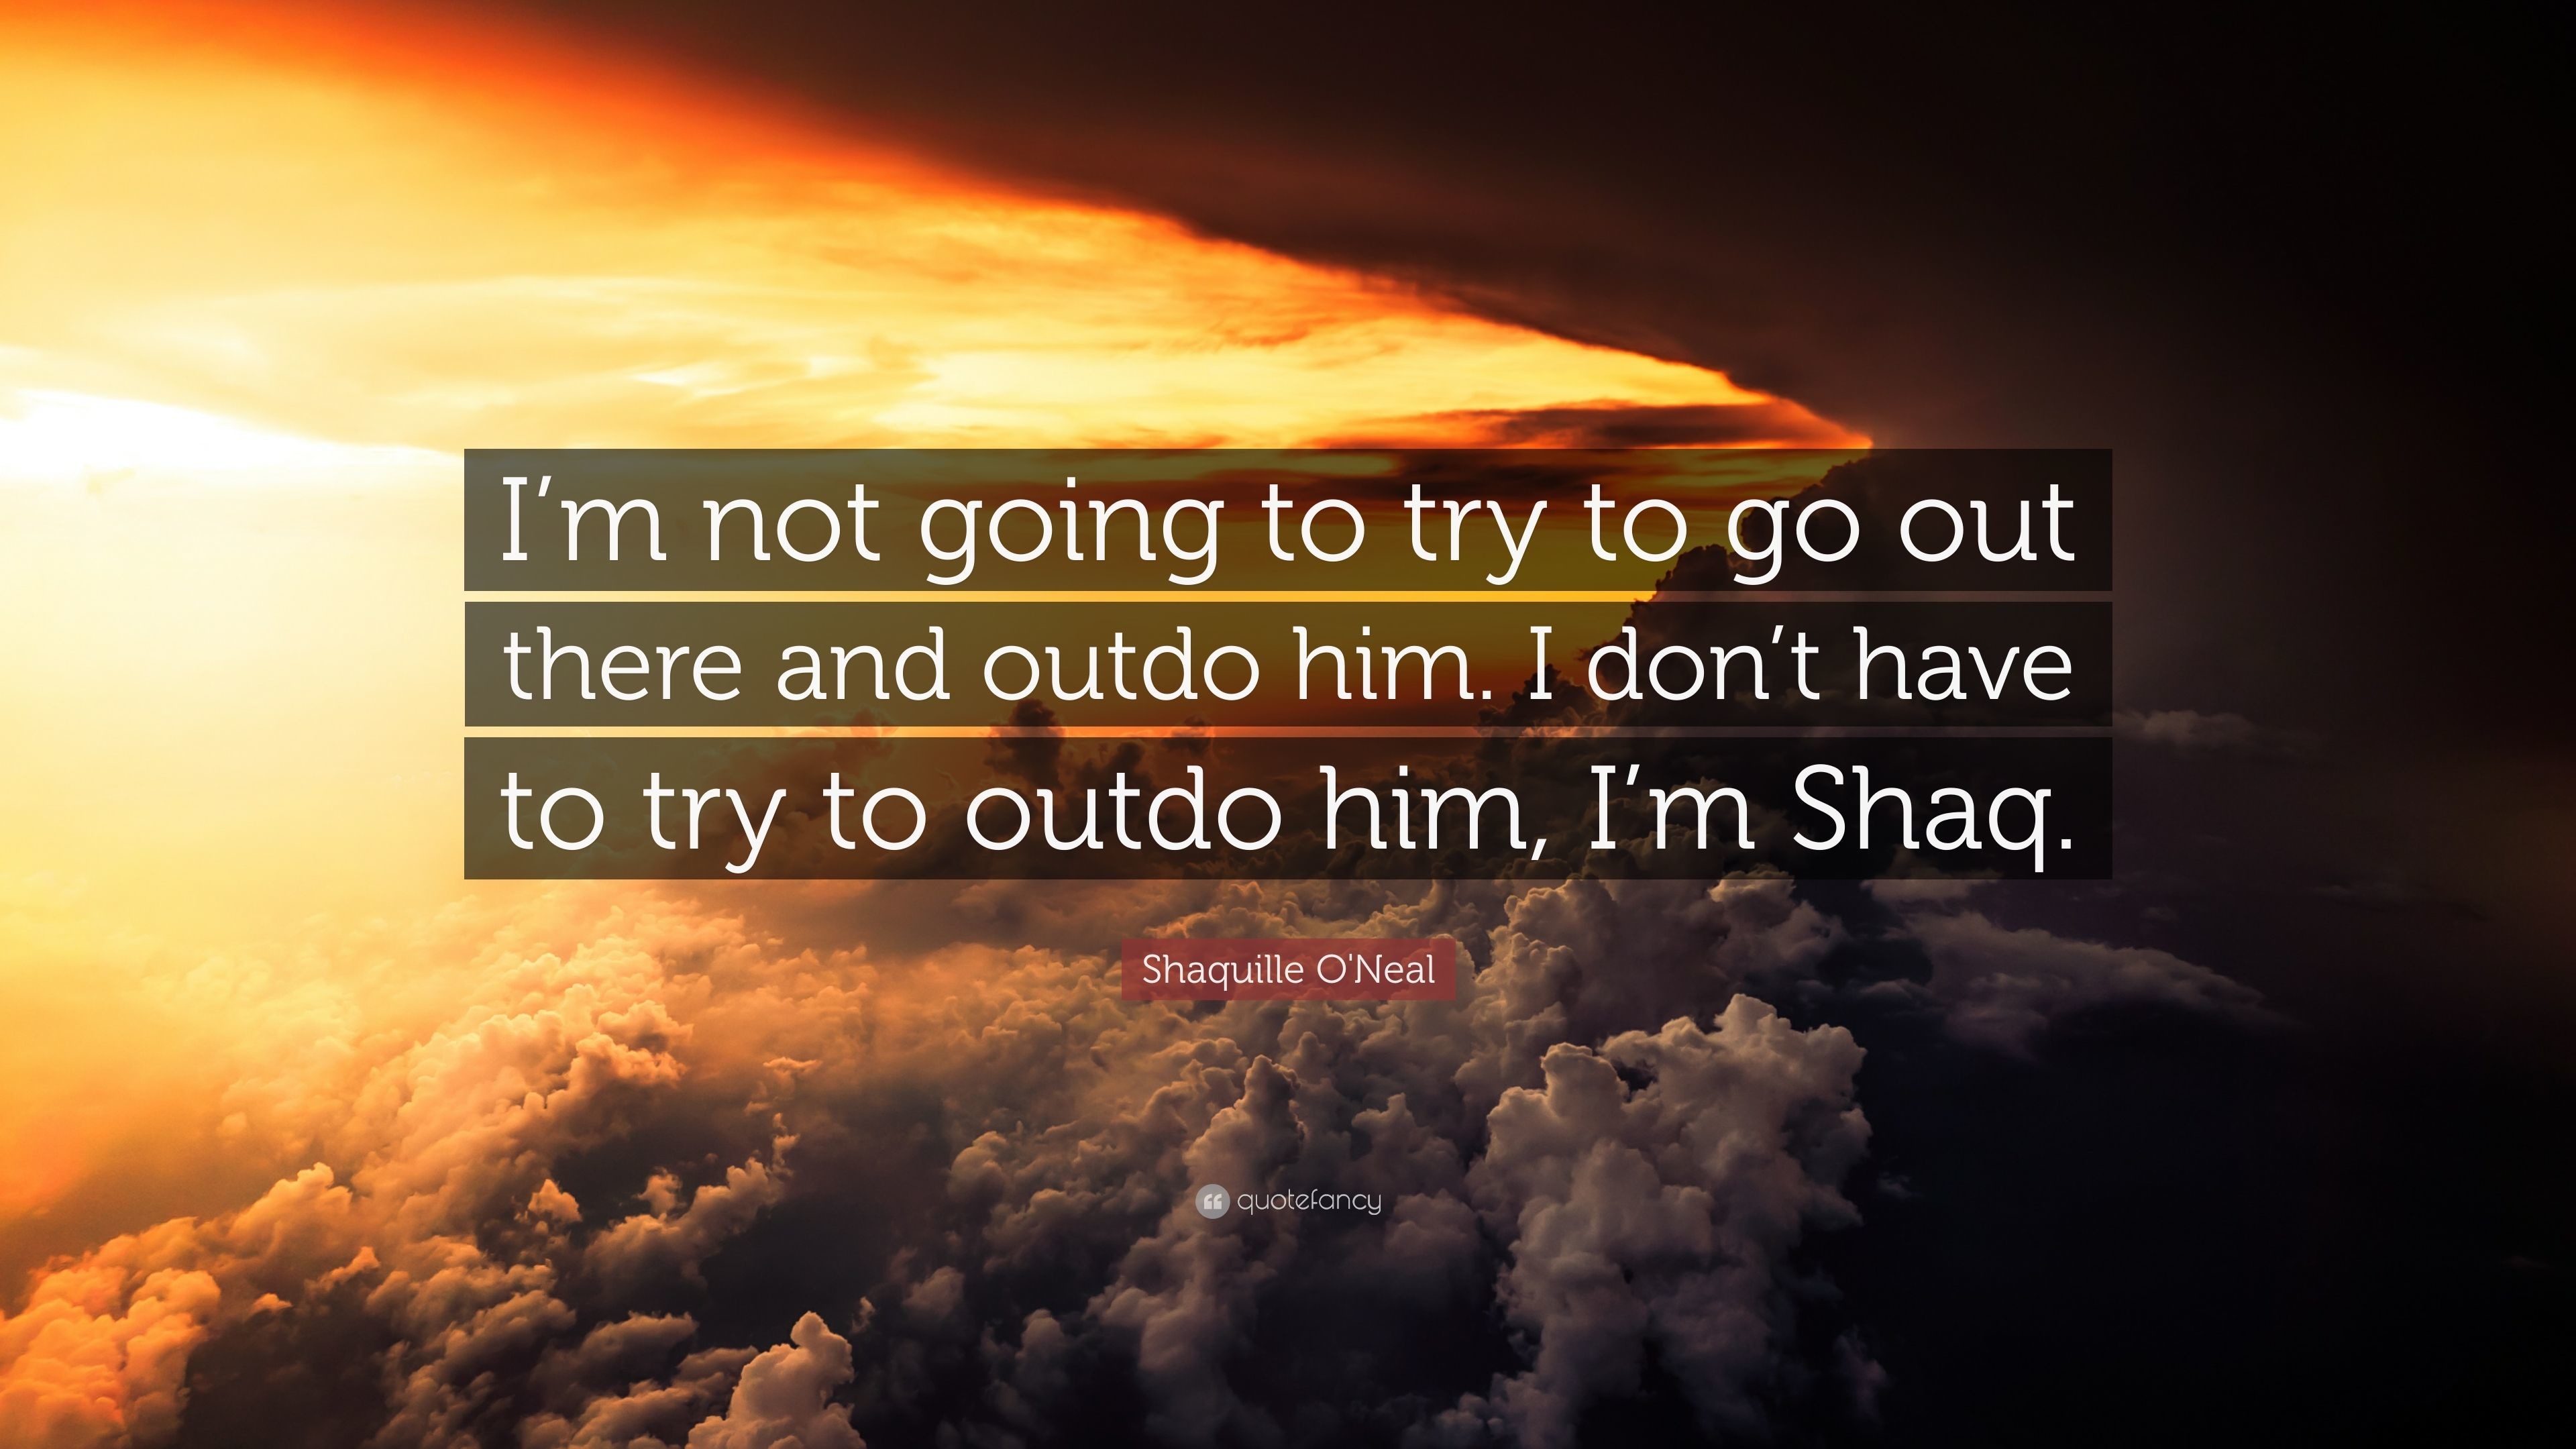 3840x2160 Shaquille O'Neal Quote: “I'm not going to try to go